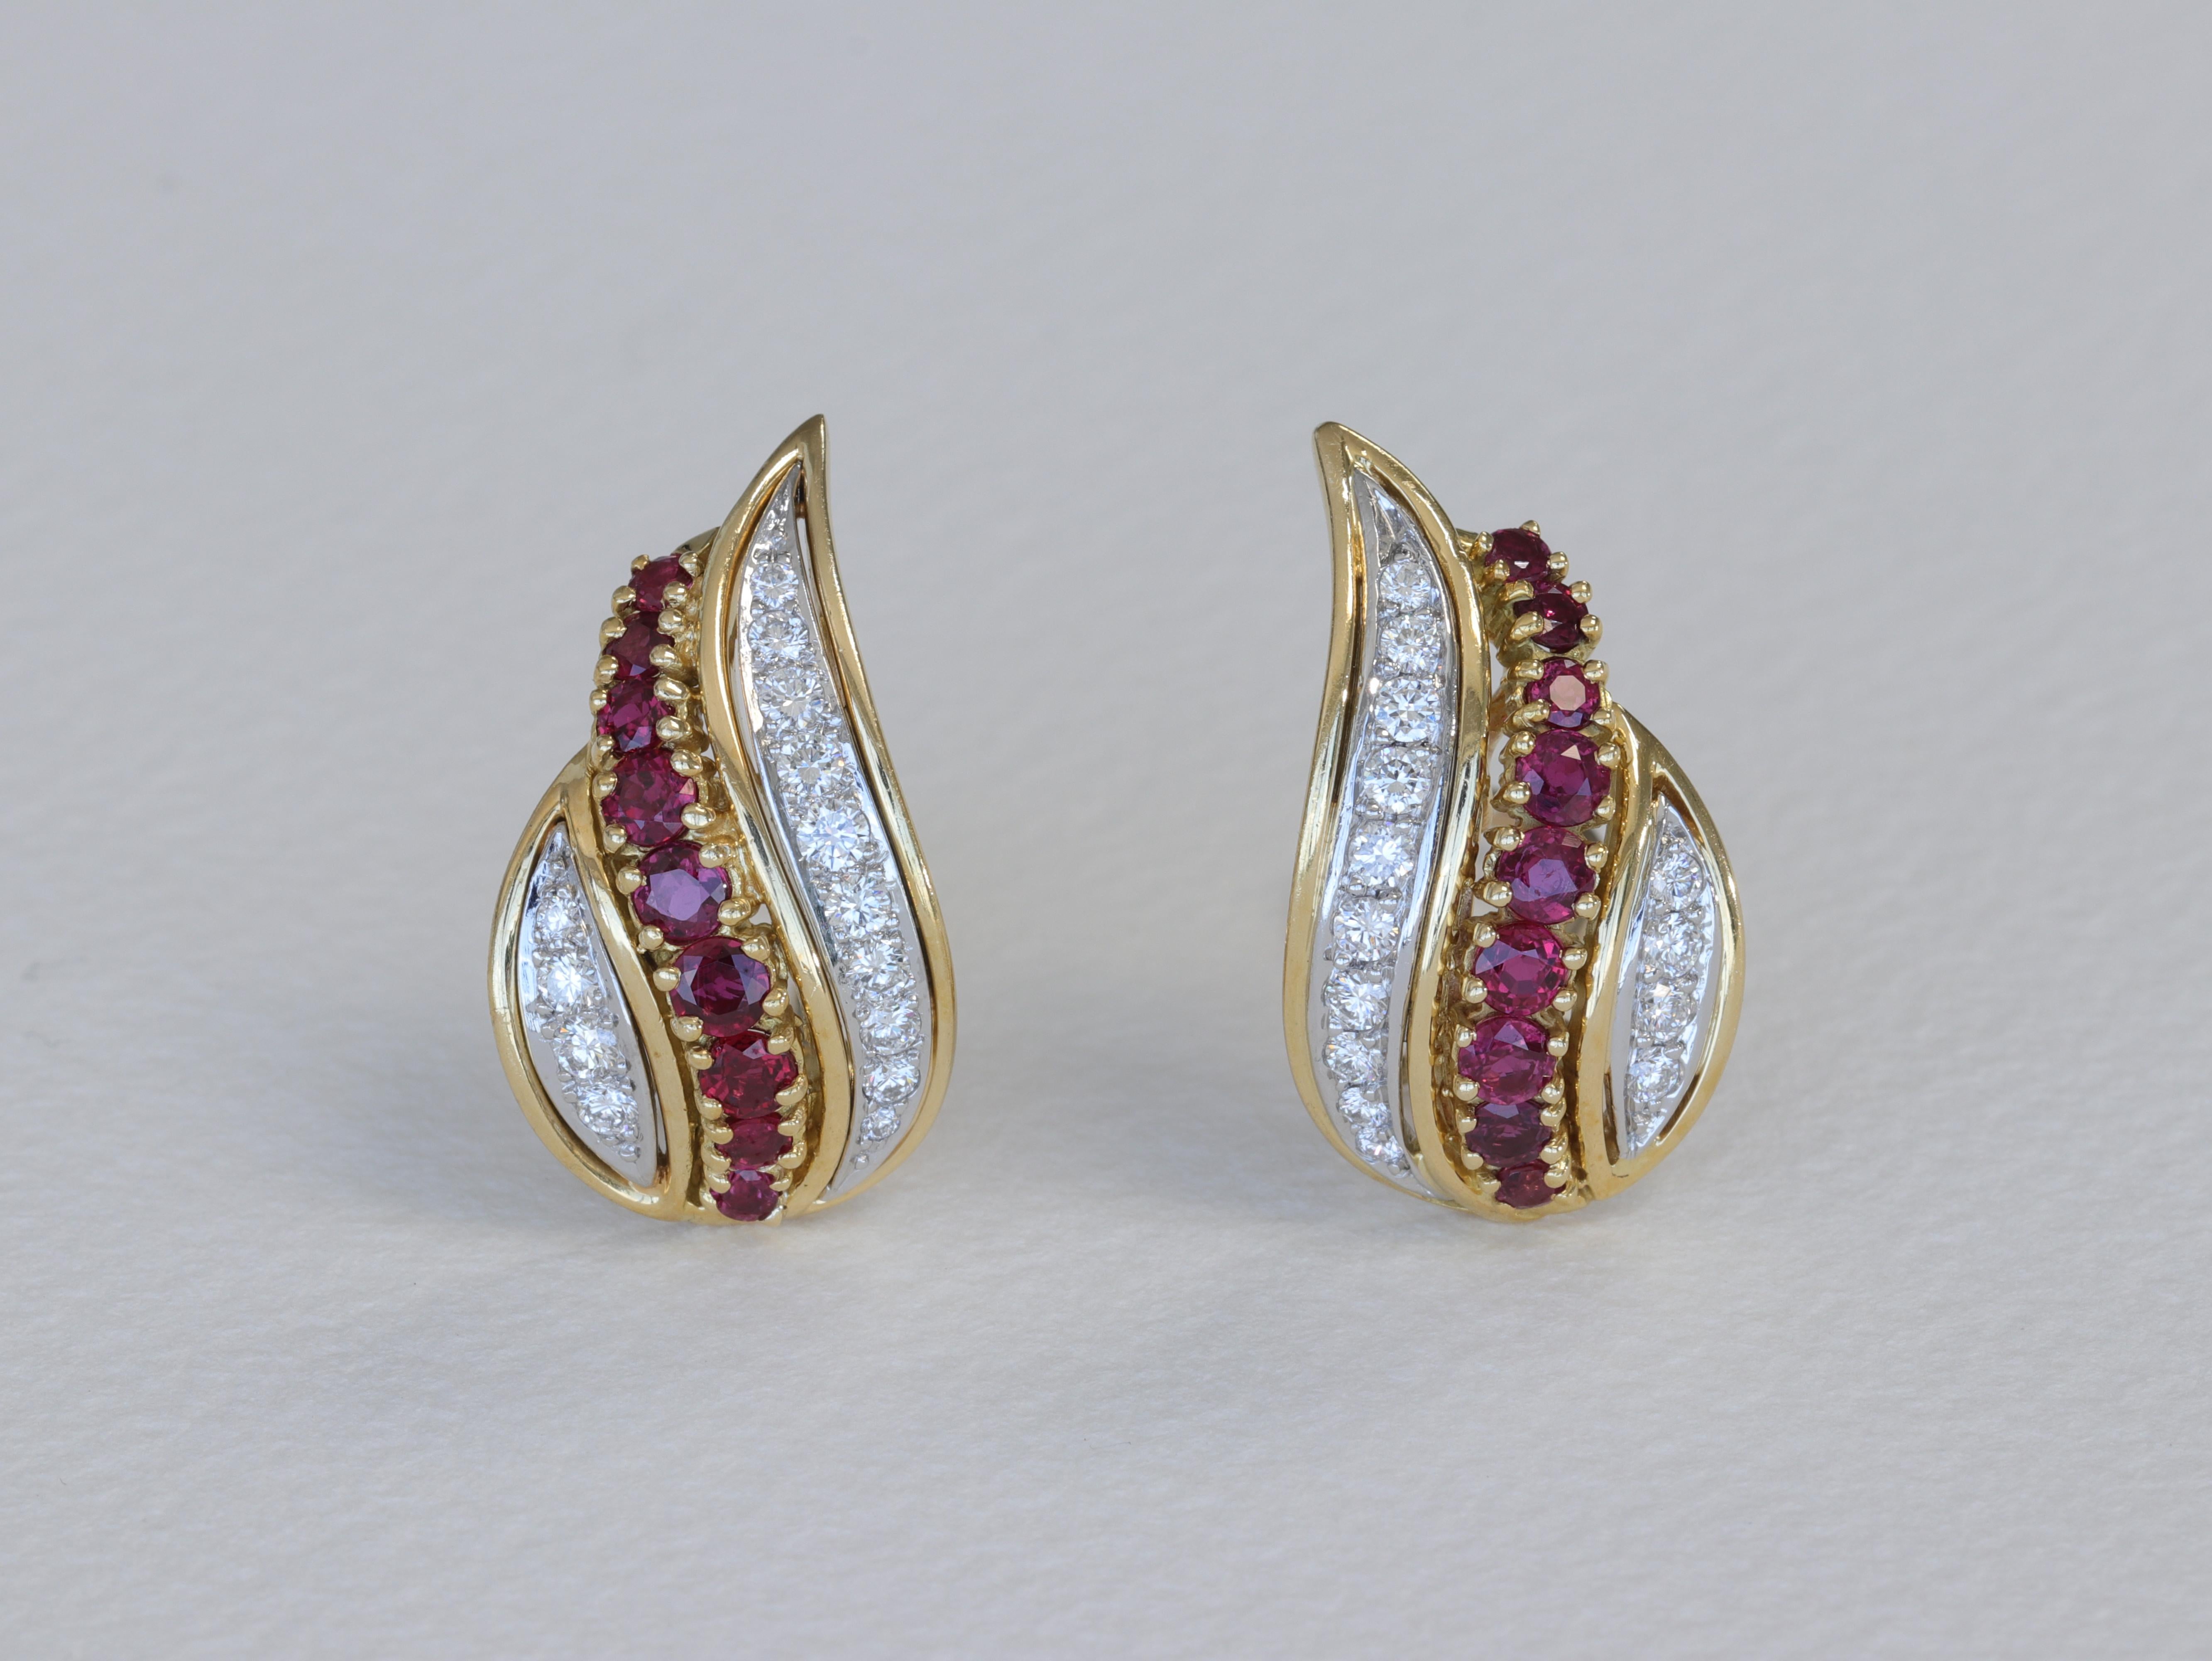 A special pair of Tiffany & Co. paisley motif round cut diamond and ruby earrings set in 18 karat yellow gold and platinum with lever back posts. 

The diamonds weigh in total approximately 1.50 carats, with colors of D-G and clarities of